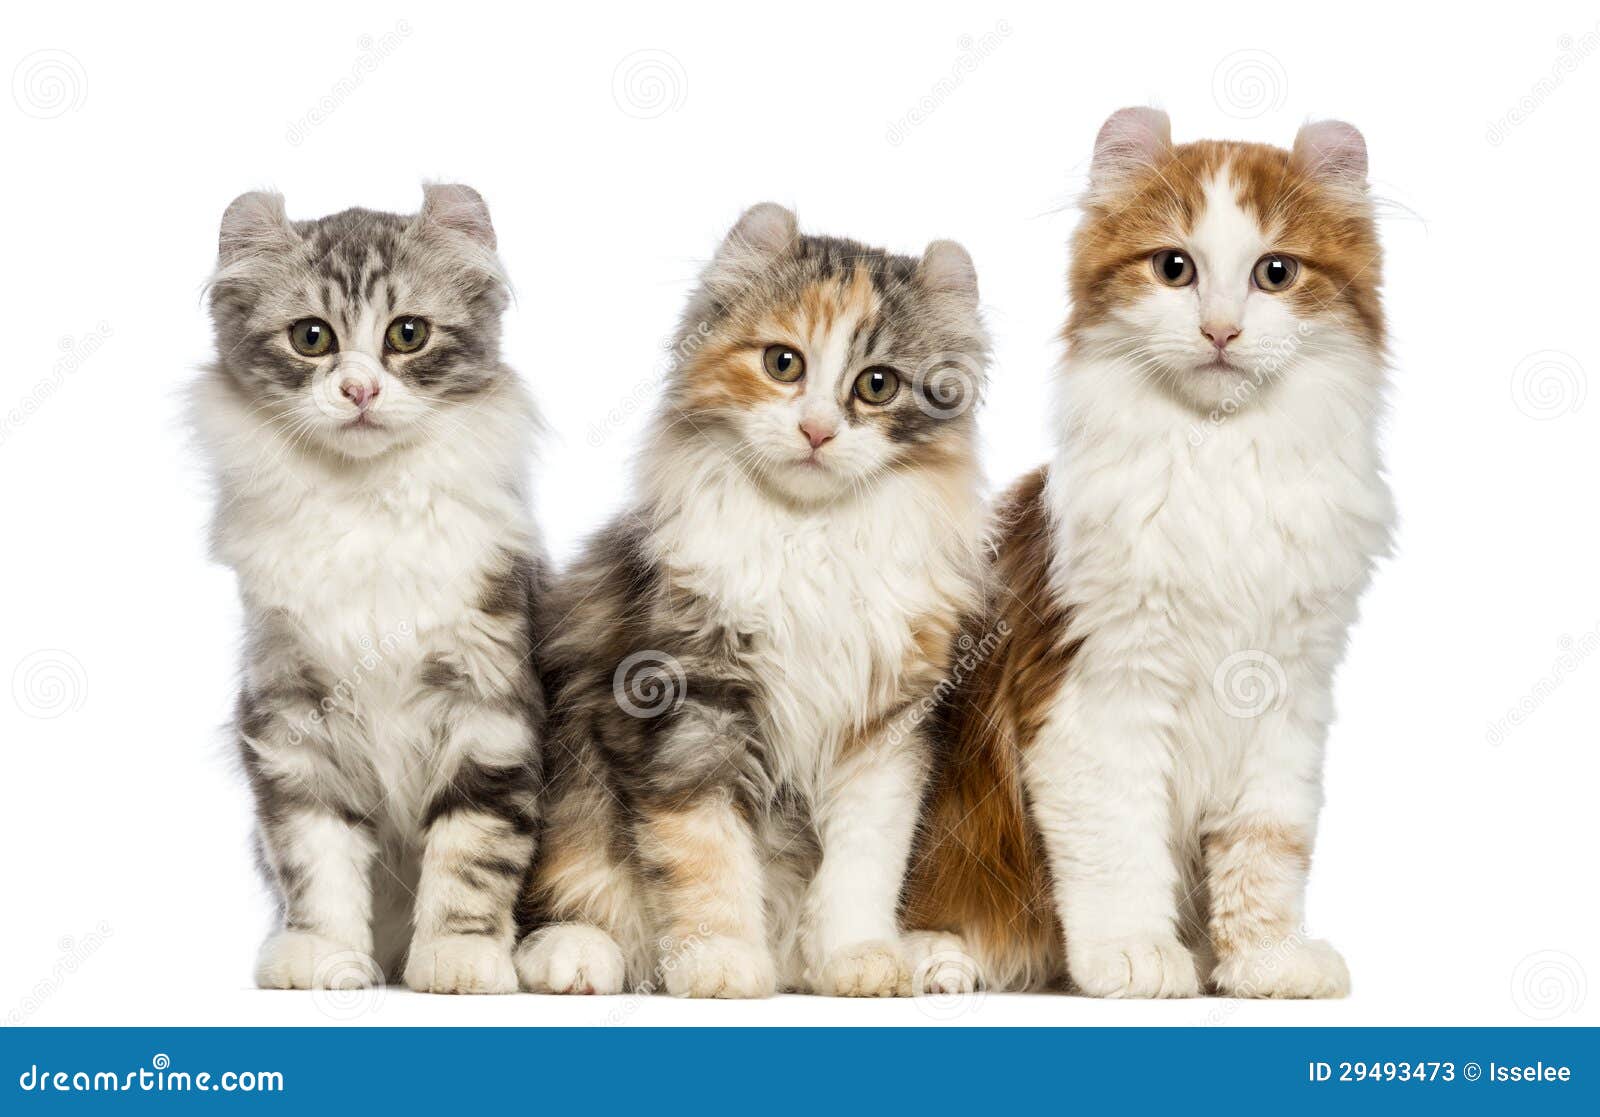 three american curl kittens, 3 months old, sitting and looking at the camera